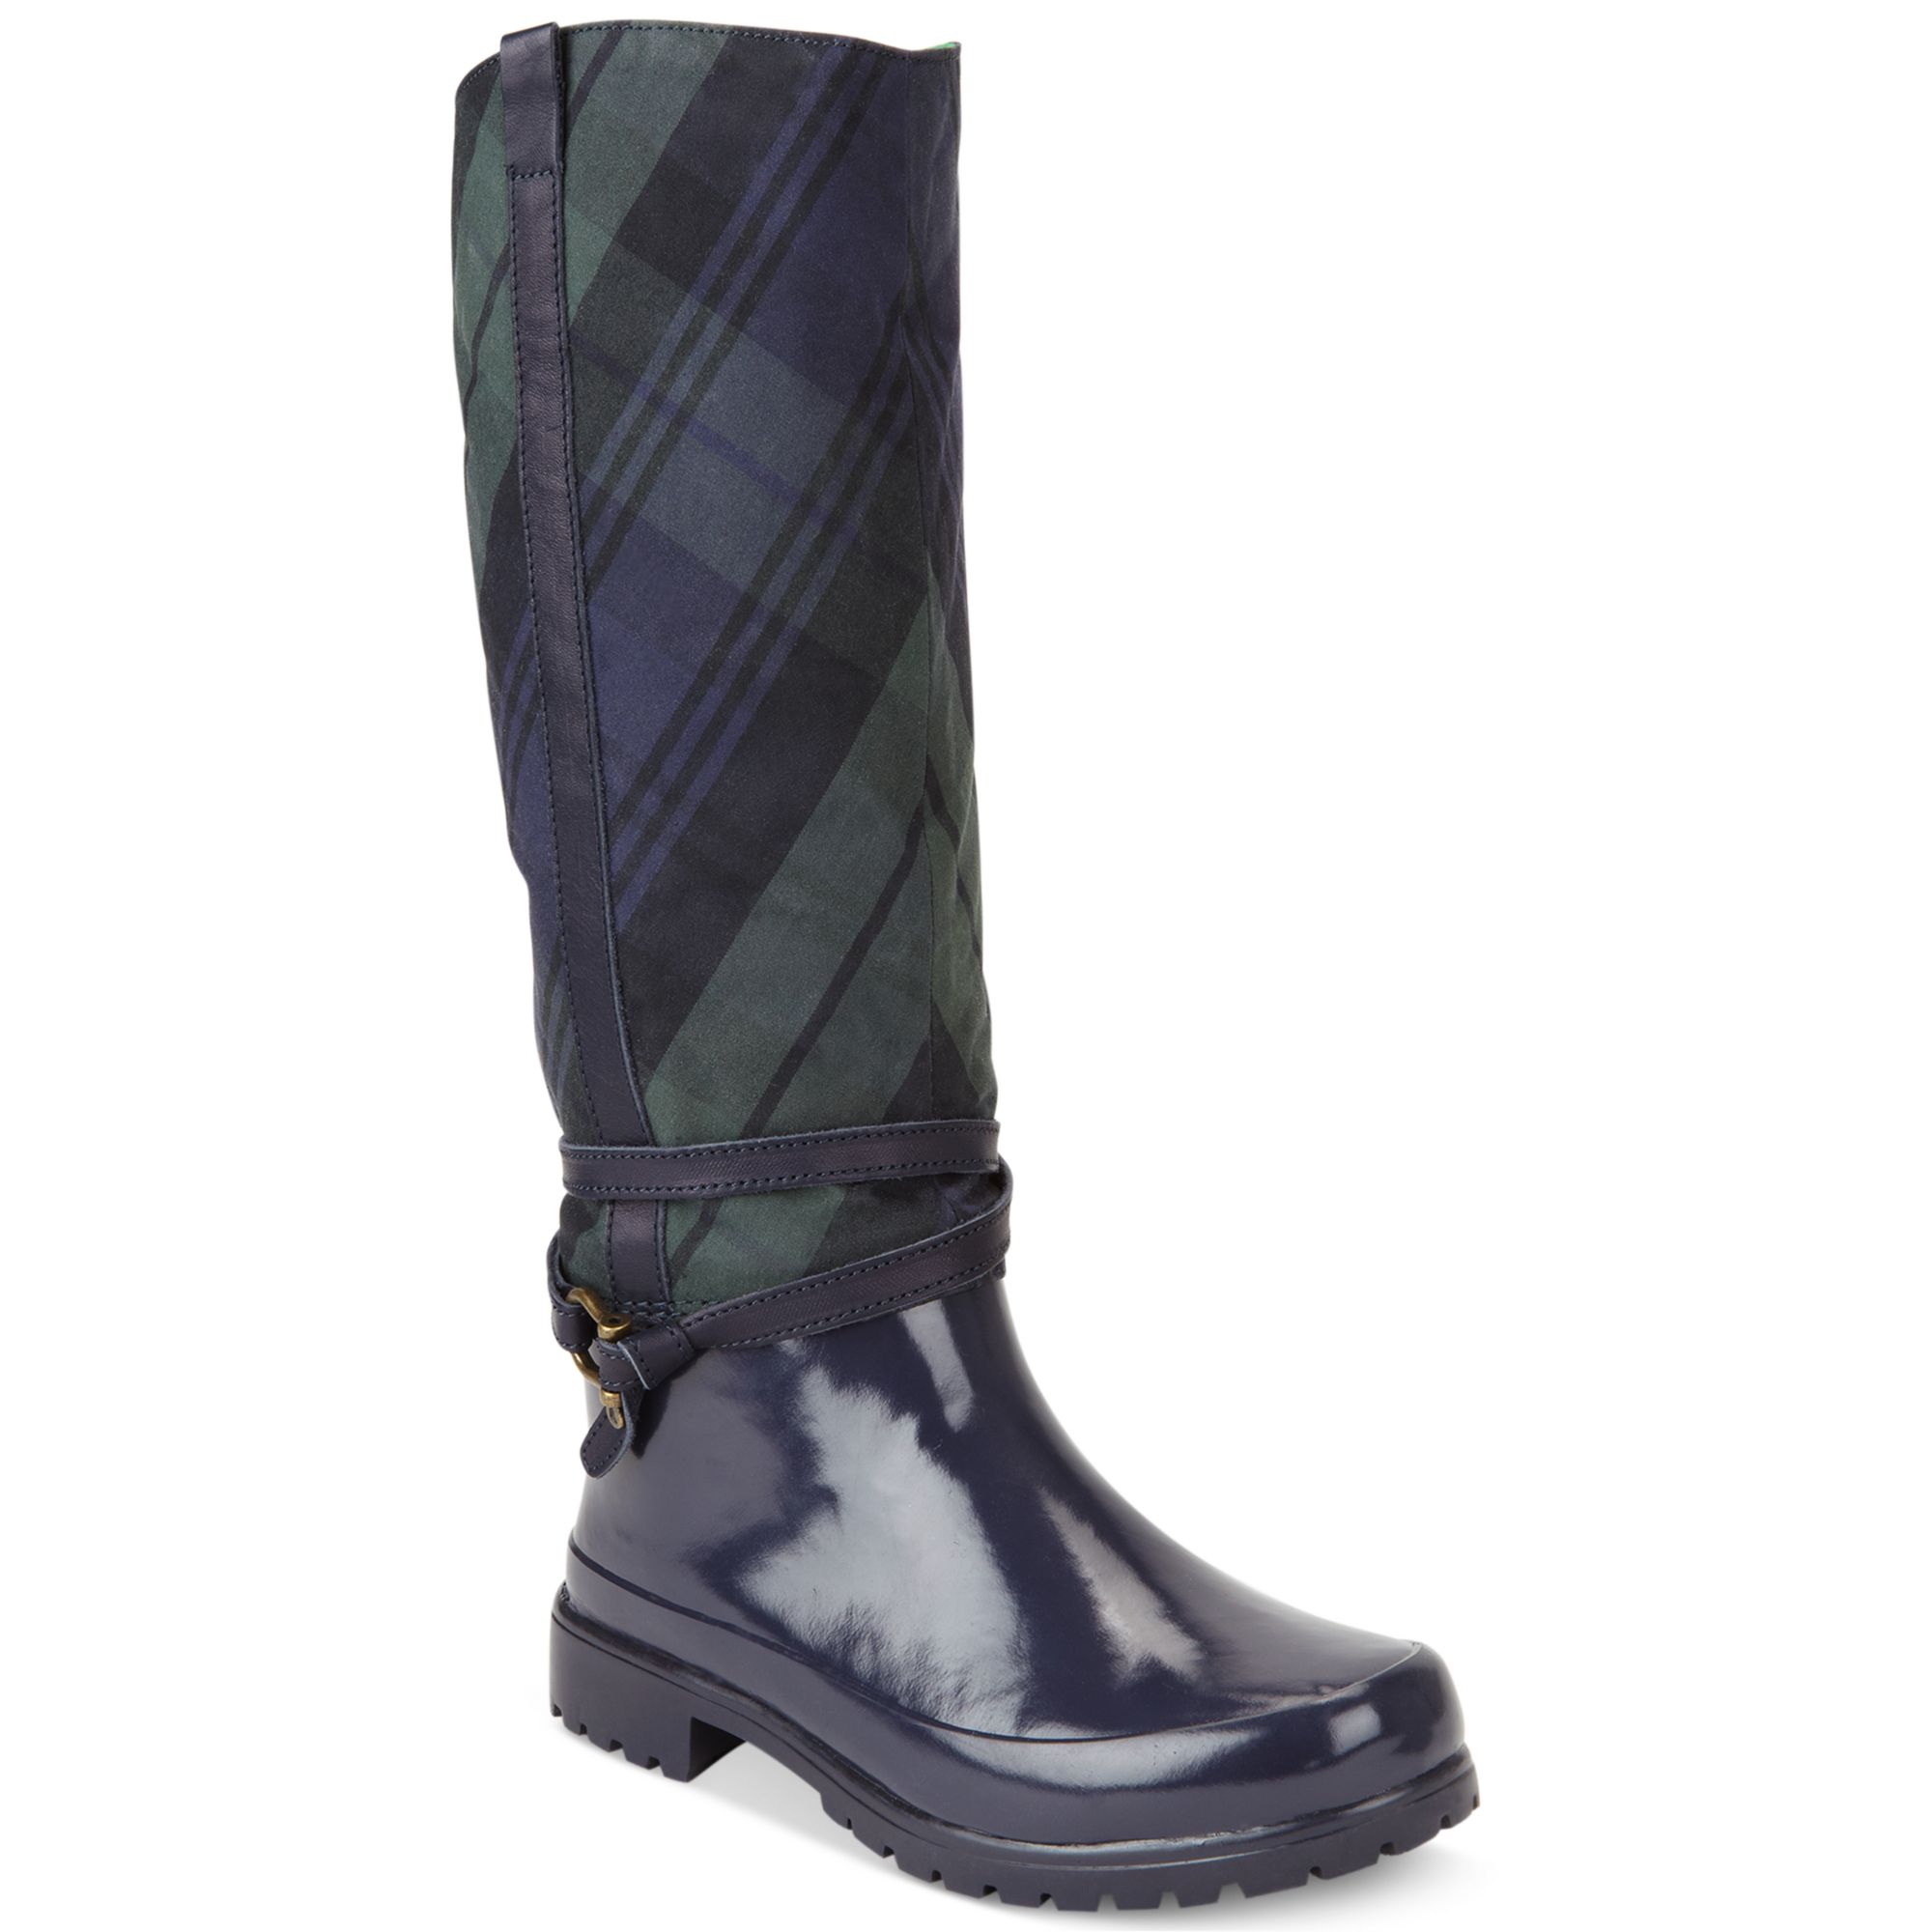 Lyst - Sperry Top-Sider Everham Tall Rain Boots in Blue